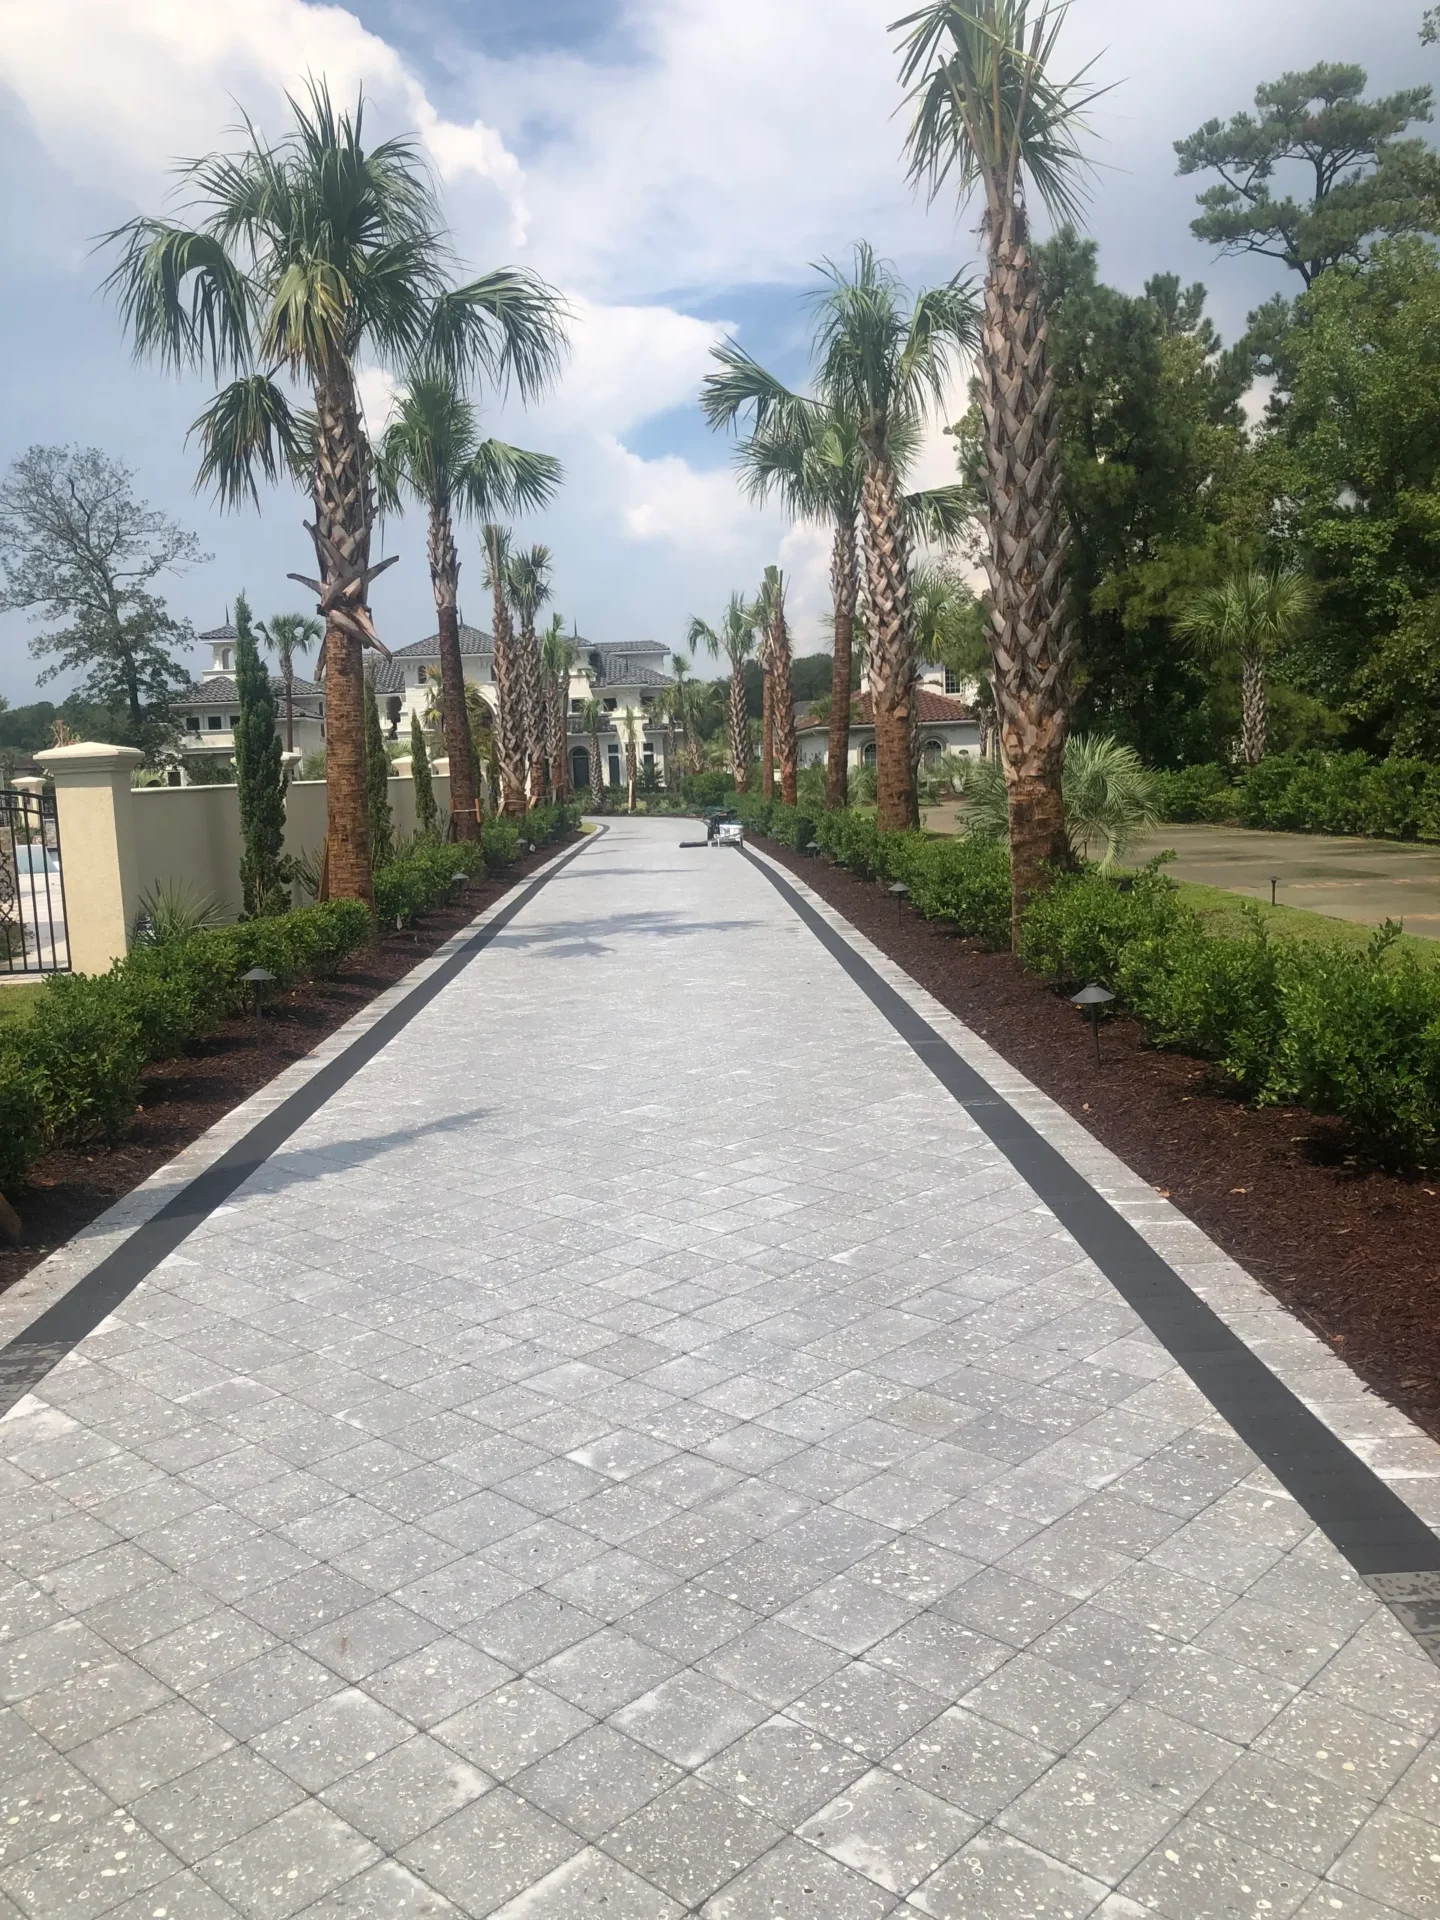 A long paved walkway with palm trees and bushes.